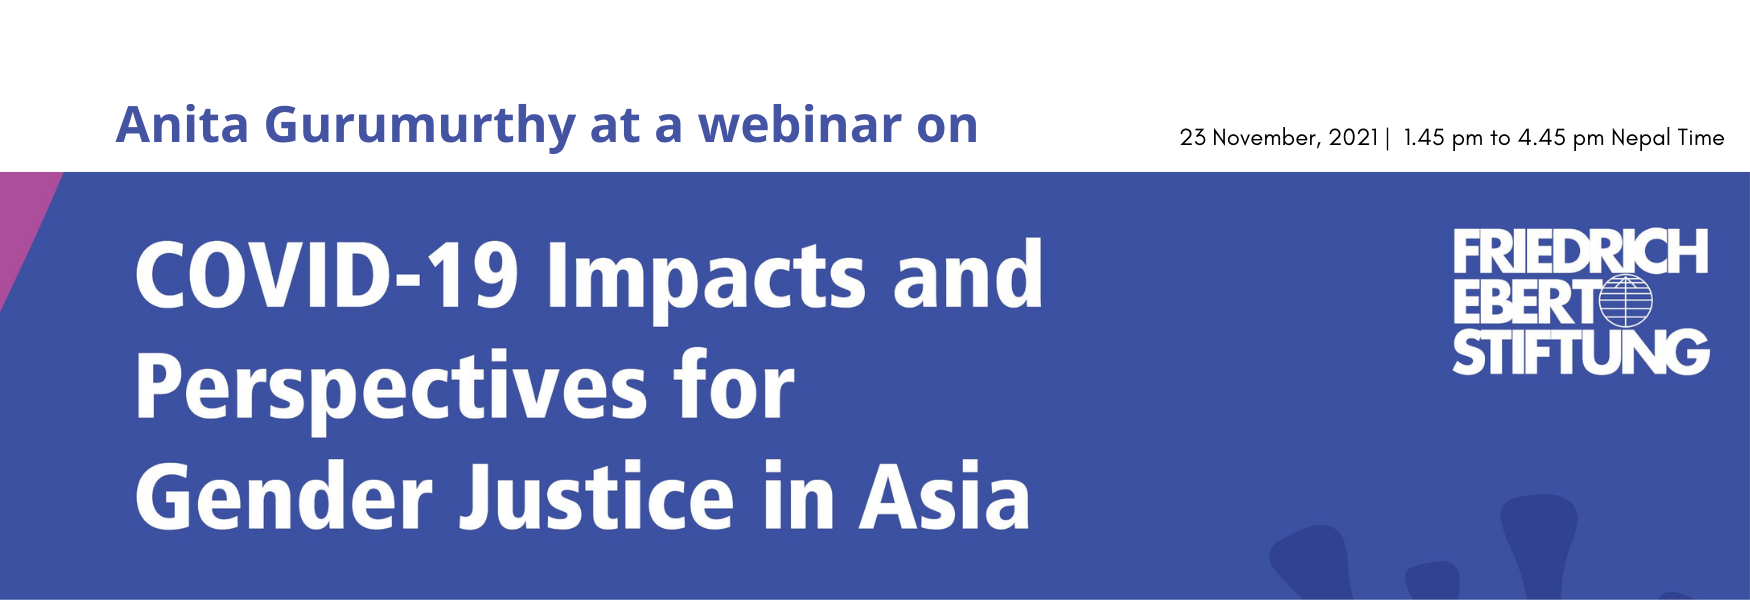  COVID-19 Impacts and Perspective for Gender Justice in Asia